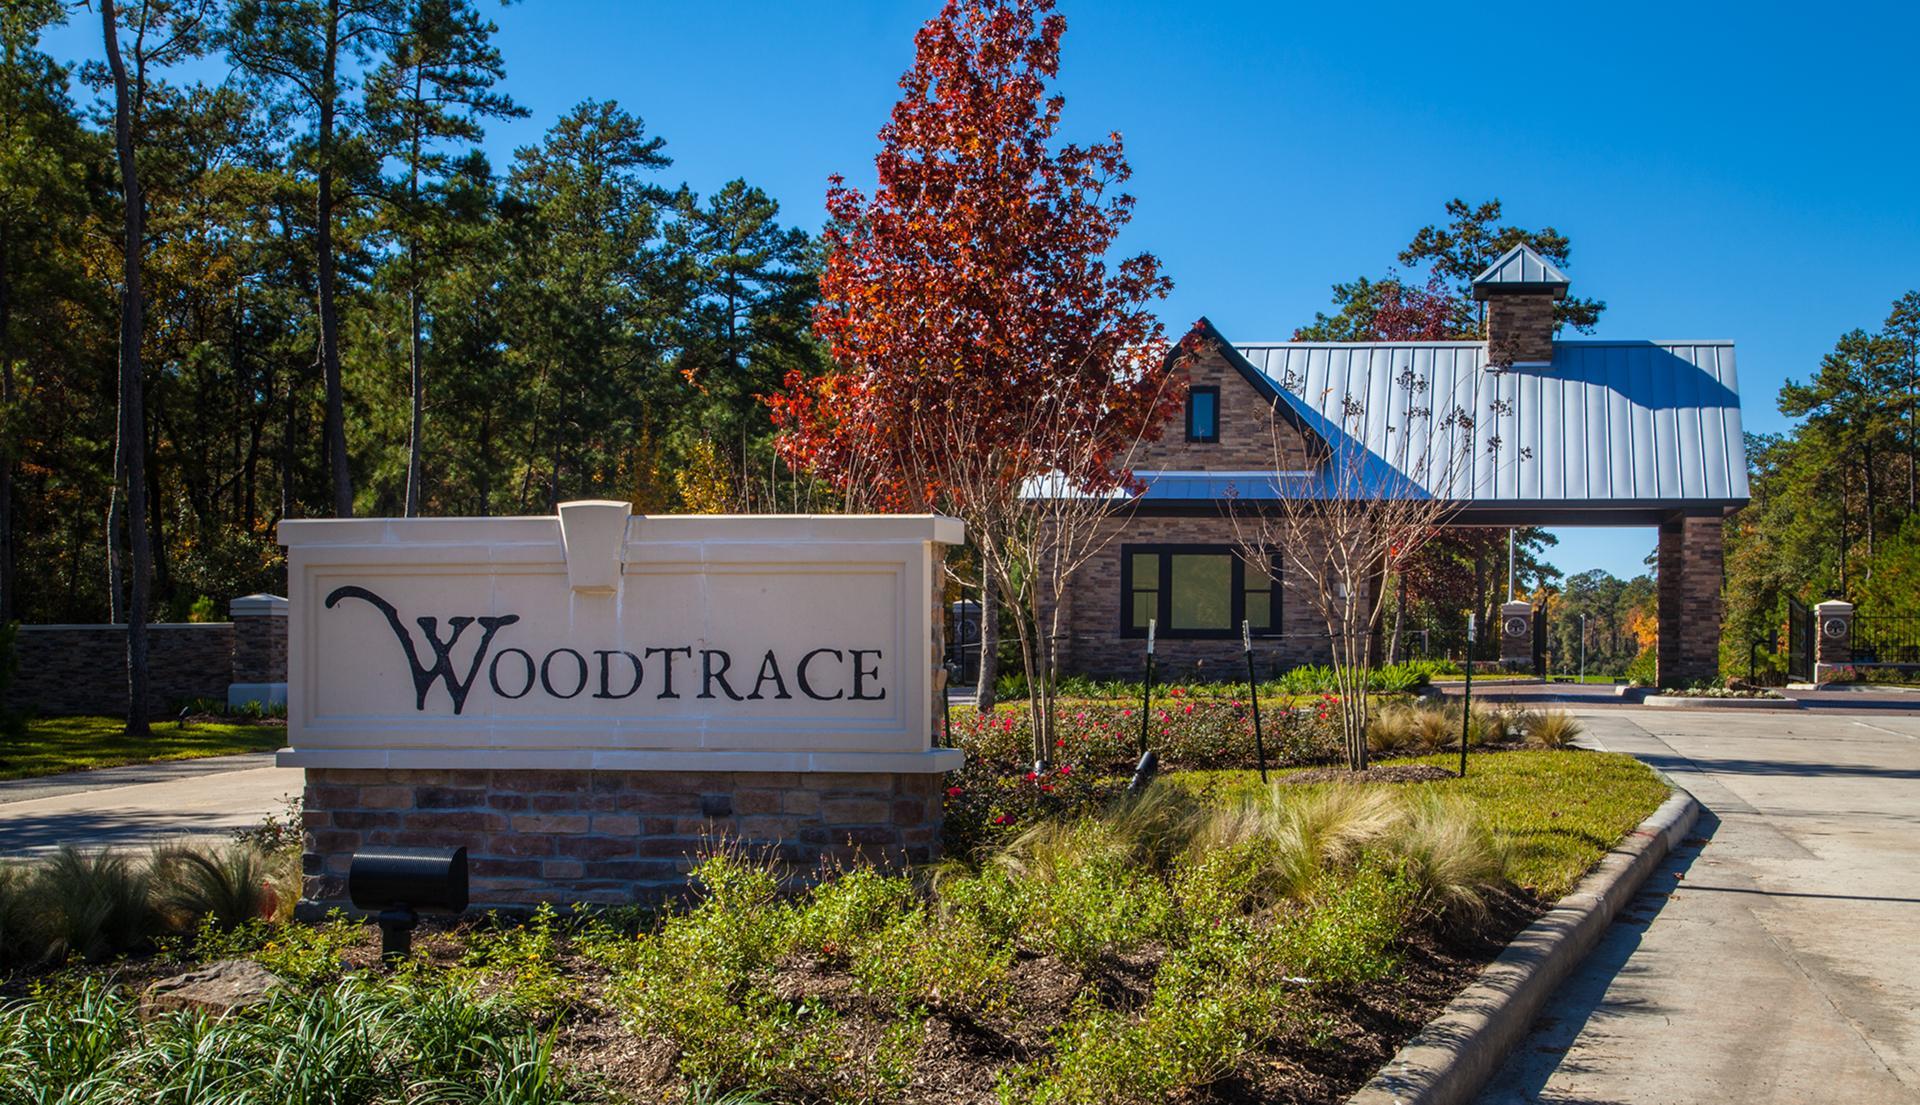 The Woodtrace Entry